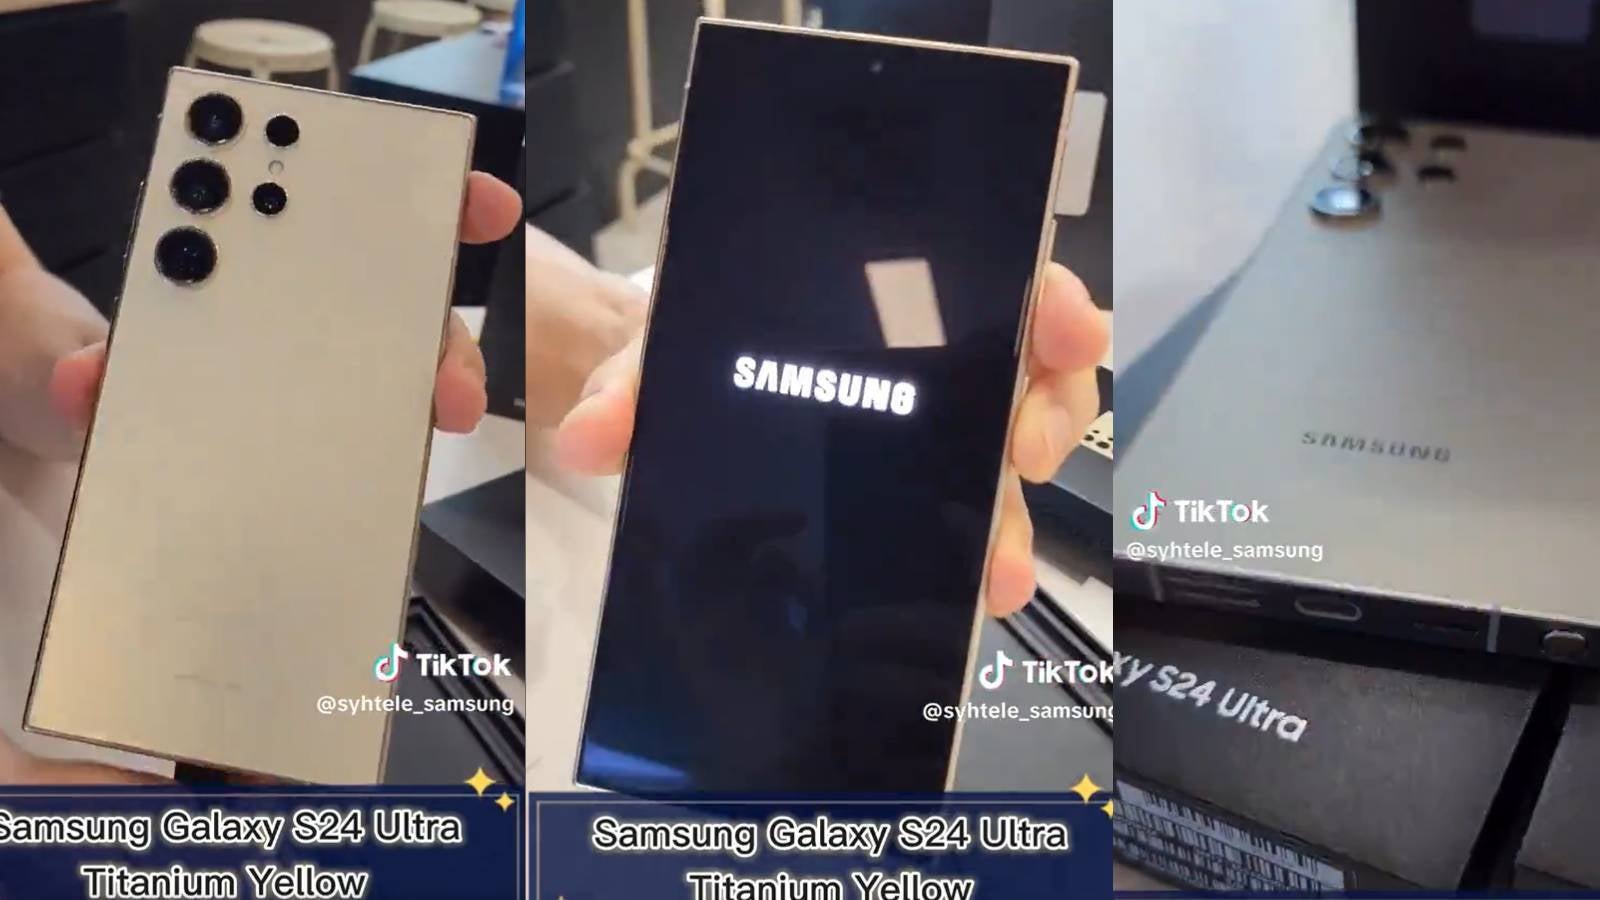 X user is playing with fire as they post Galaxy S24 Ultra unboxing videos in three colors